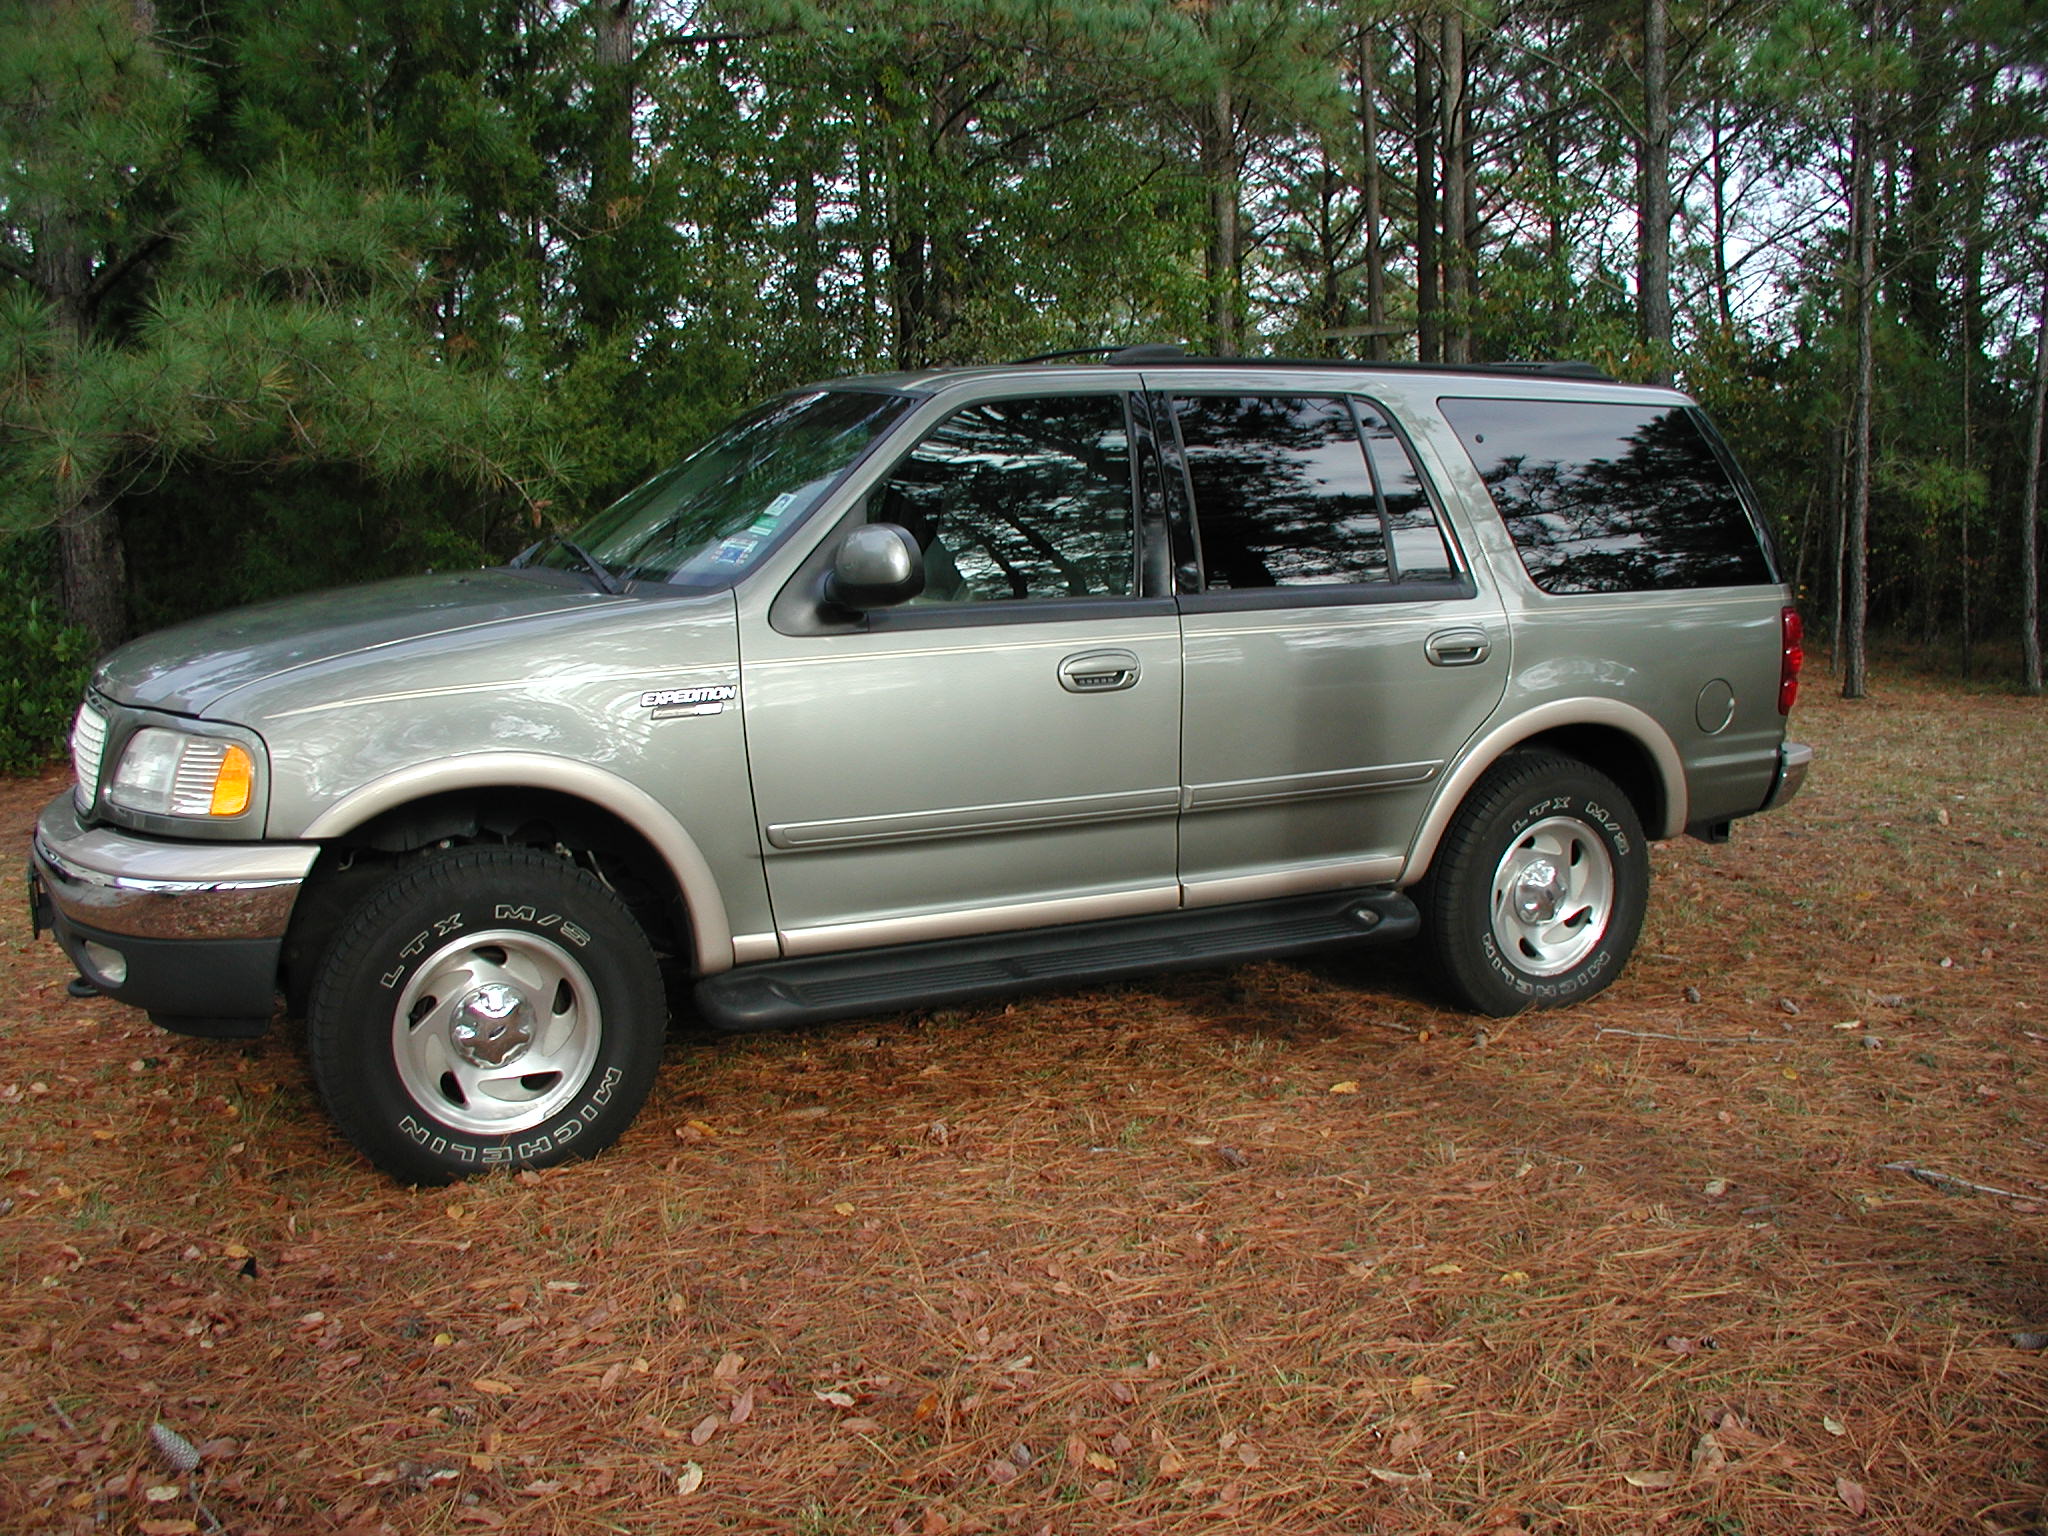 1999 Ford expedition eddie bauer edition reviews #4